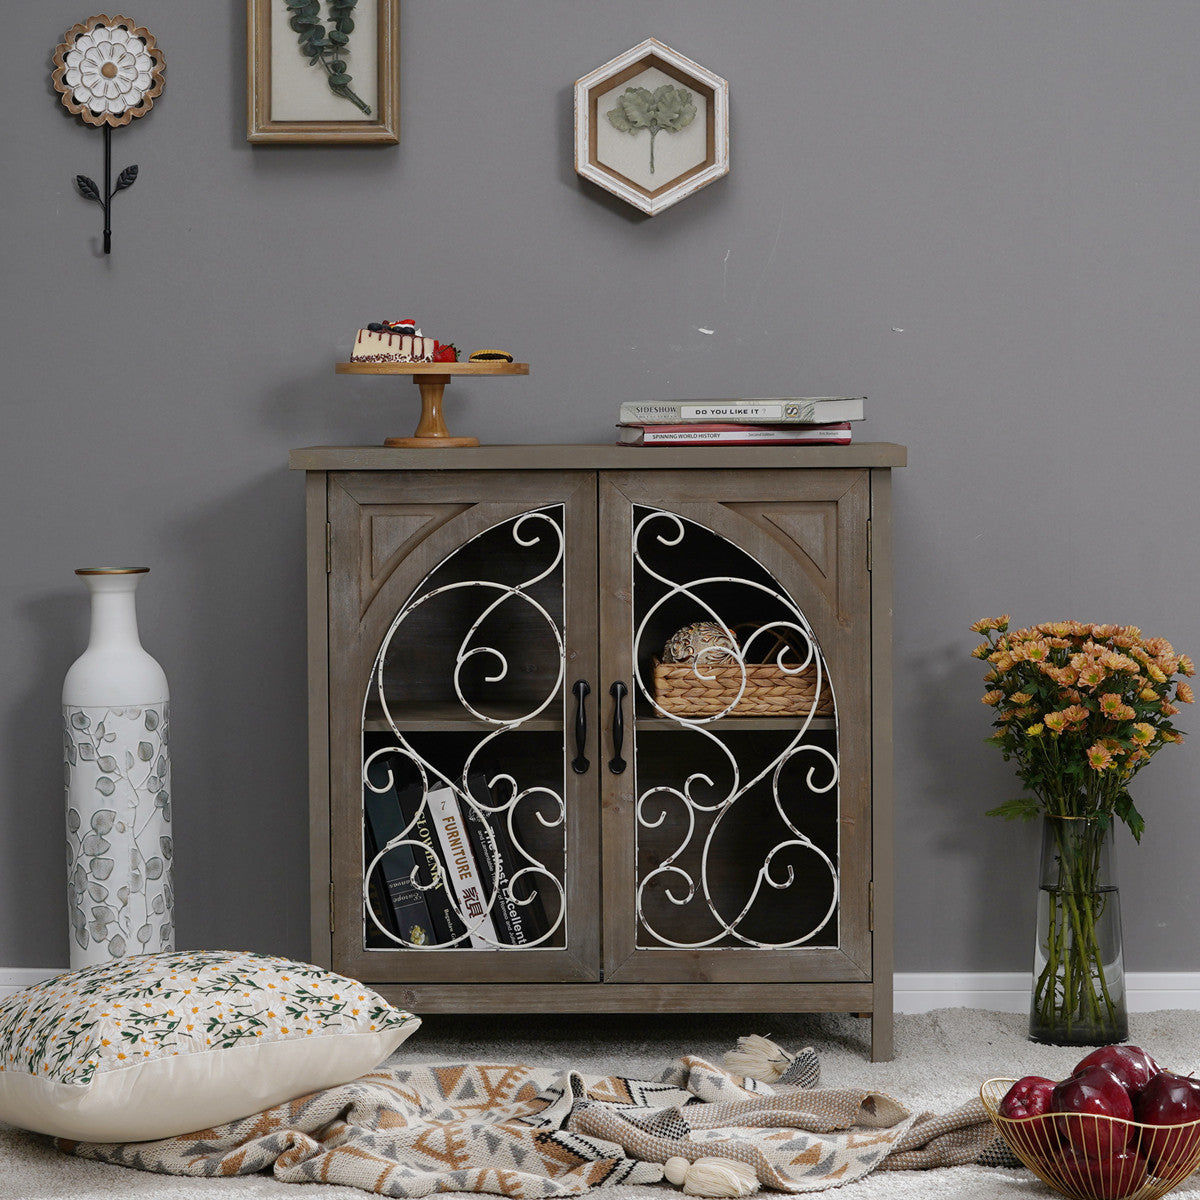 Crafted from eco-friendly materials, this cabinet boasts a unique, eye-catching design with practical details, making it a distinctive and environmentally conscious addition to any room.